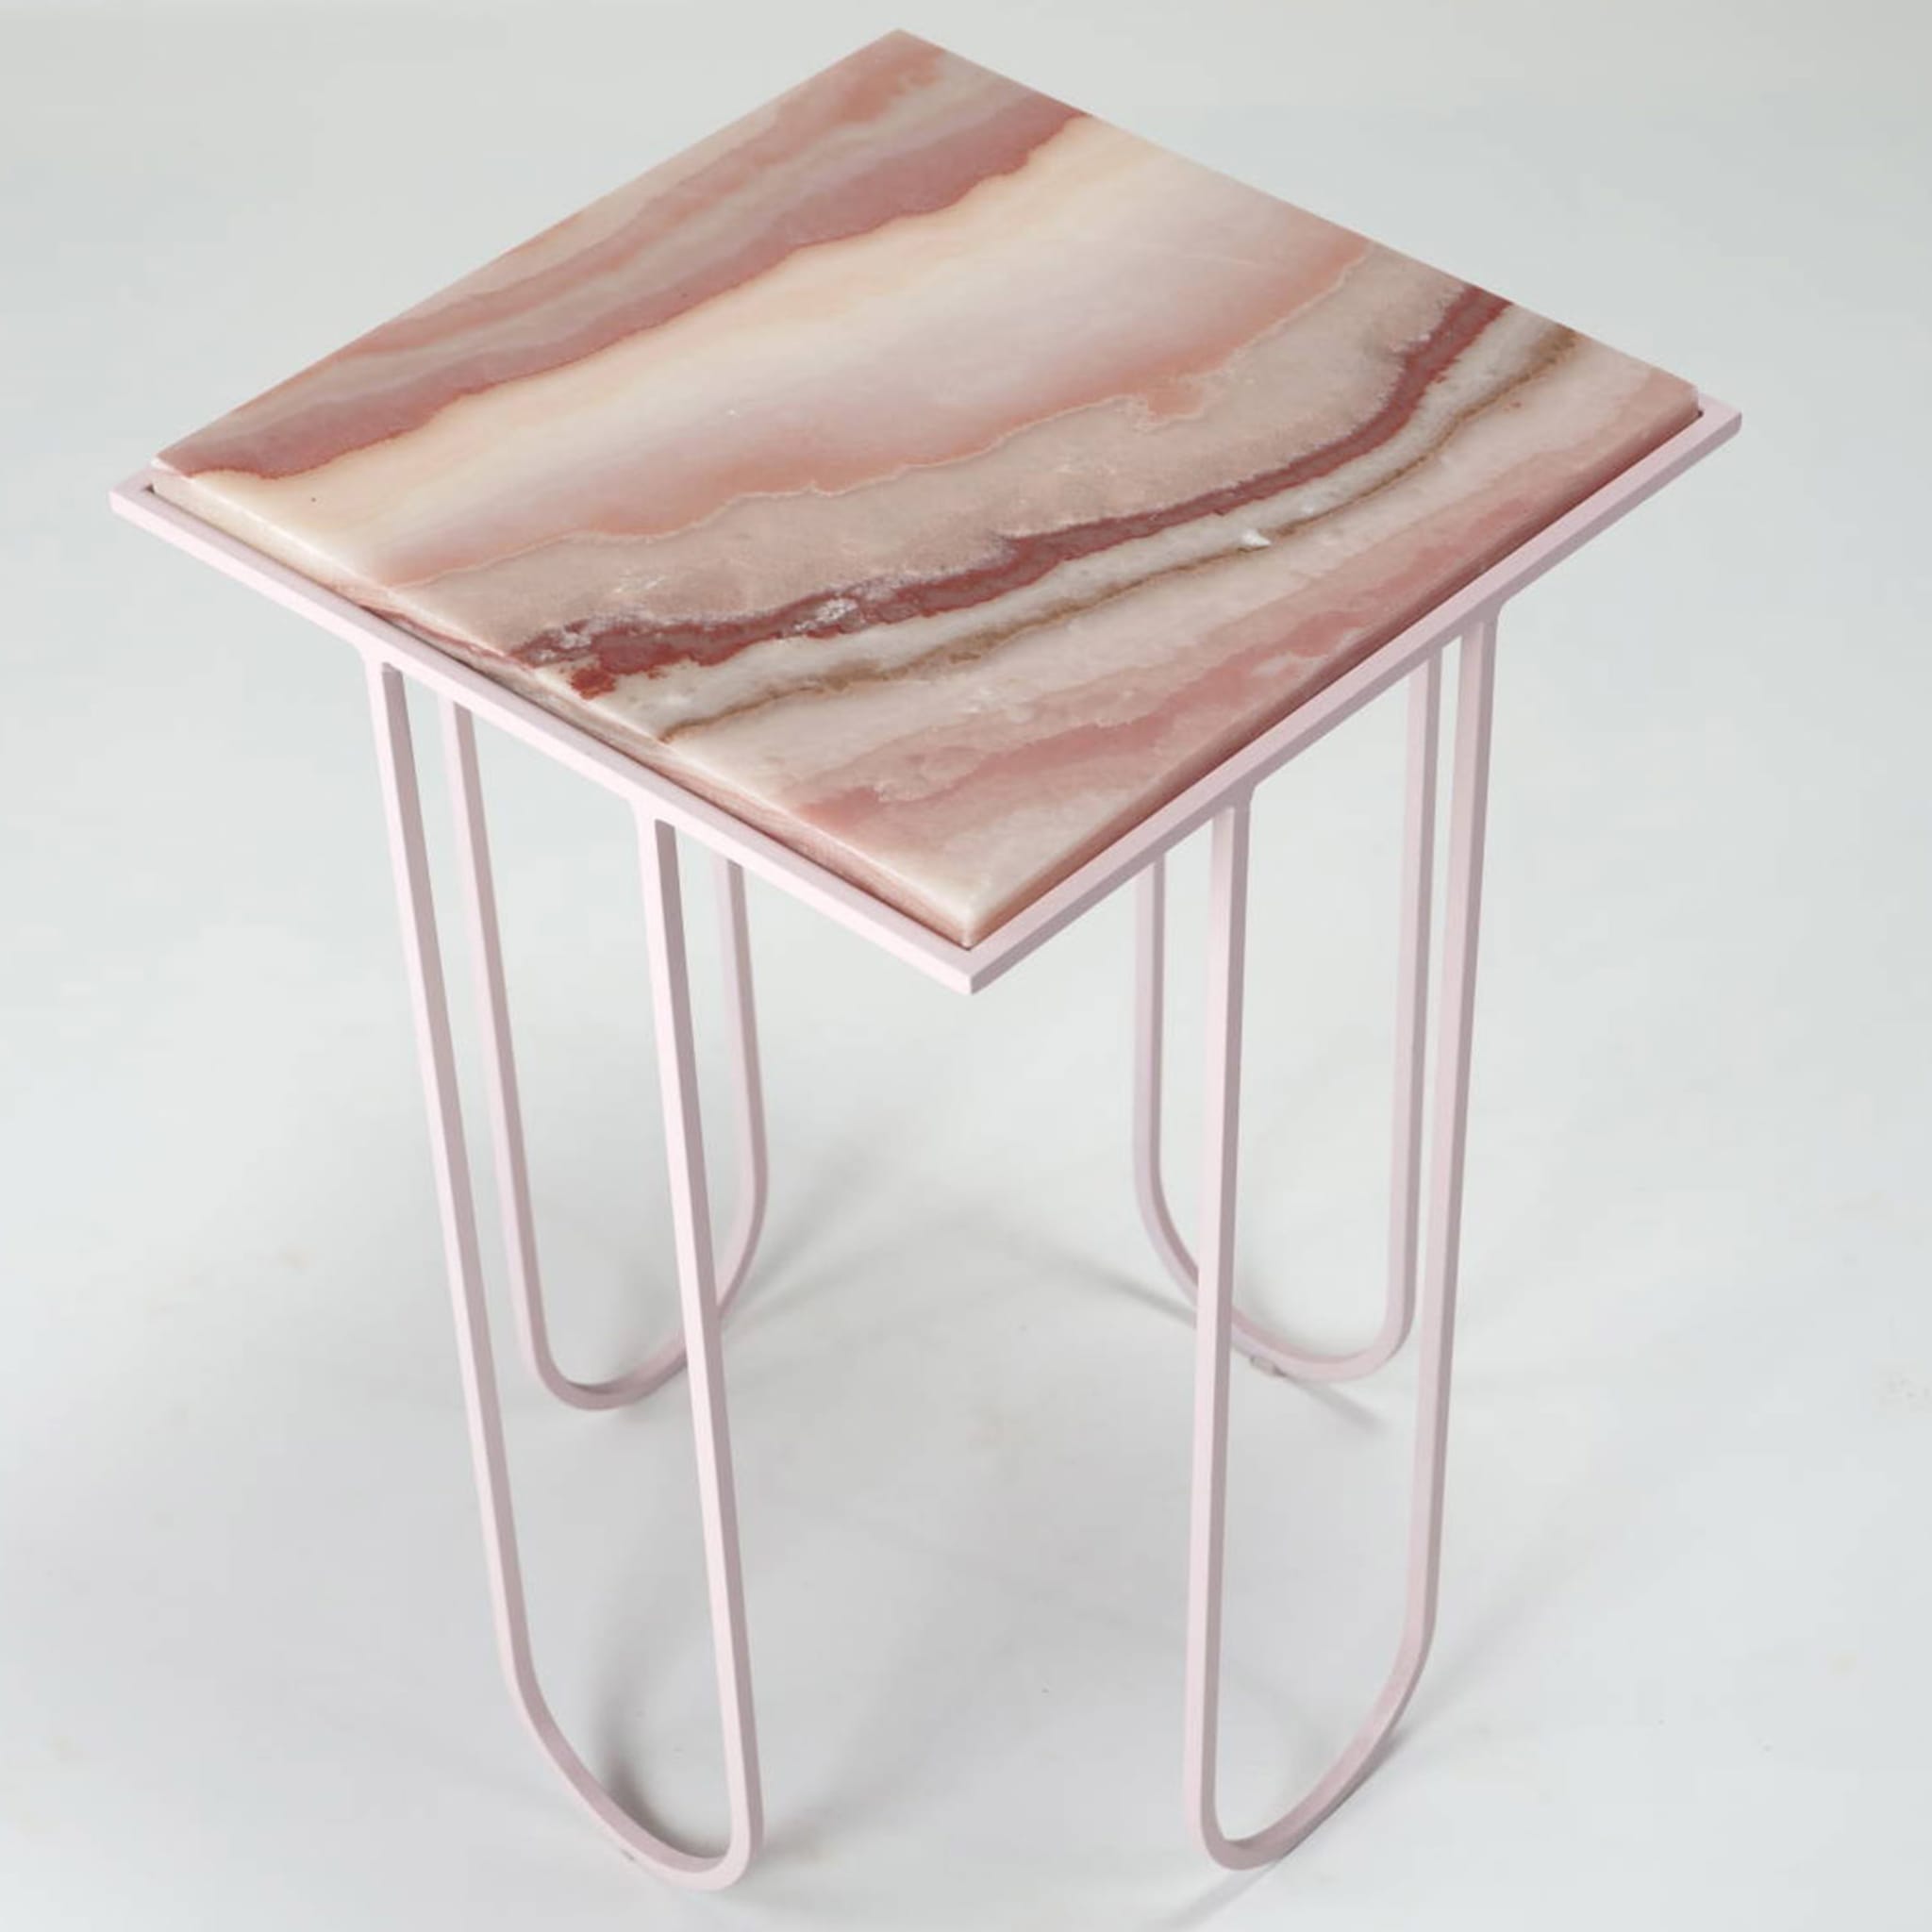 LoLa Pink Onyx Side Table - Alternative view 2